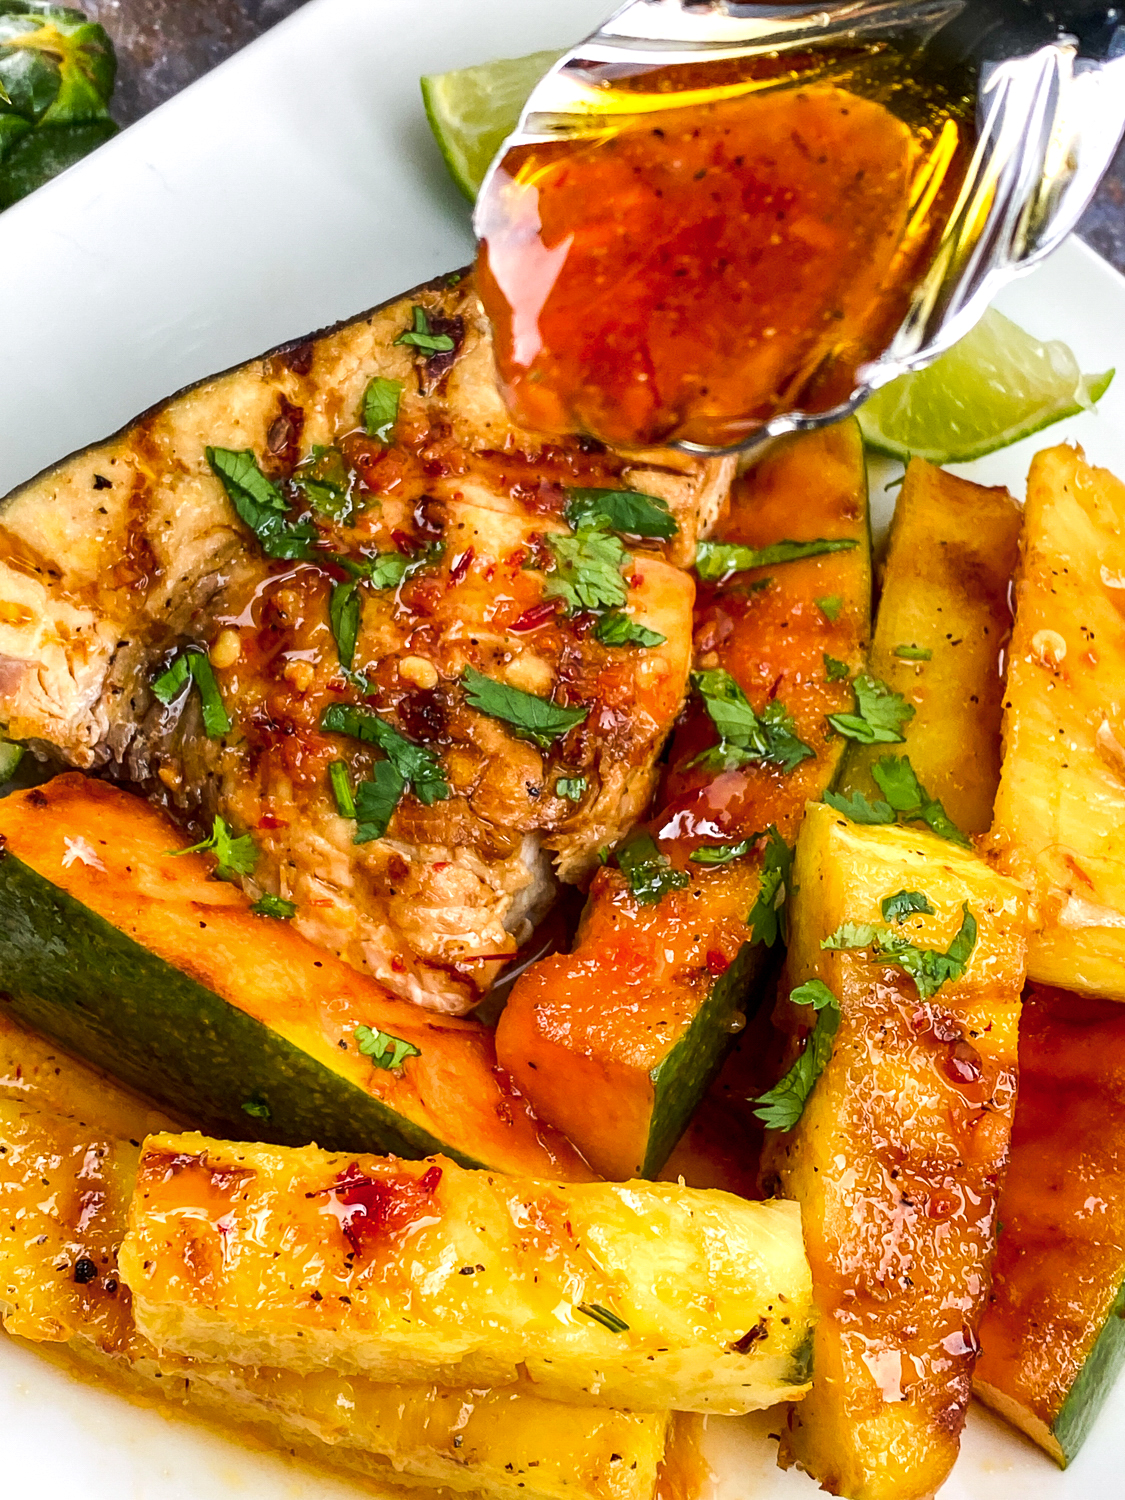 Looking for a delicious and easy recipe for swordfish? Look no further than this garlic-chili grilled swordfish with pineapple and papaya!